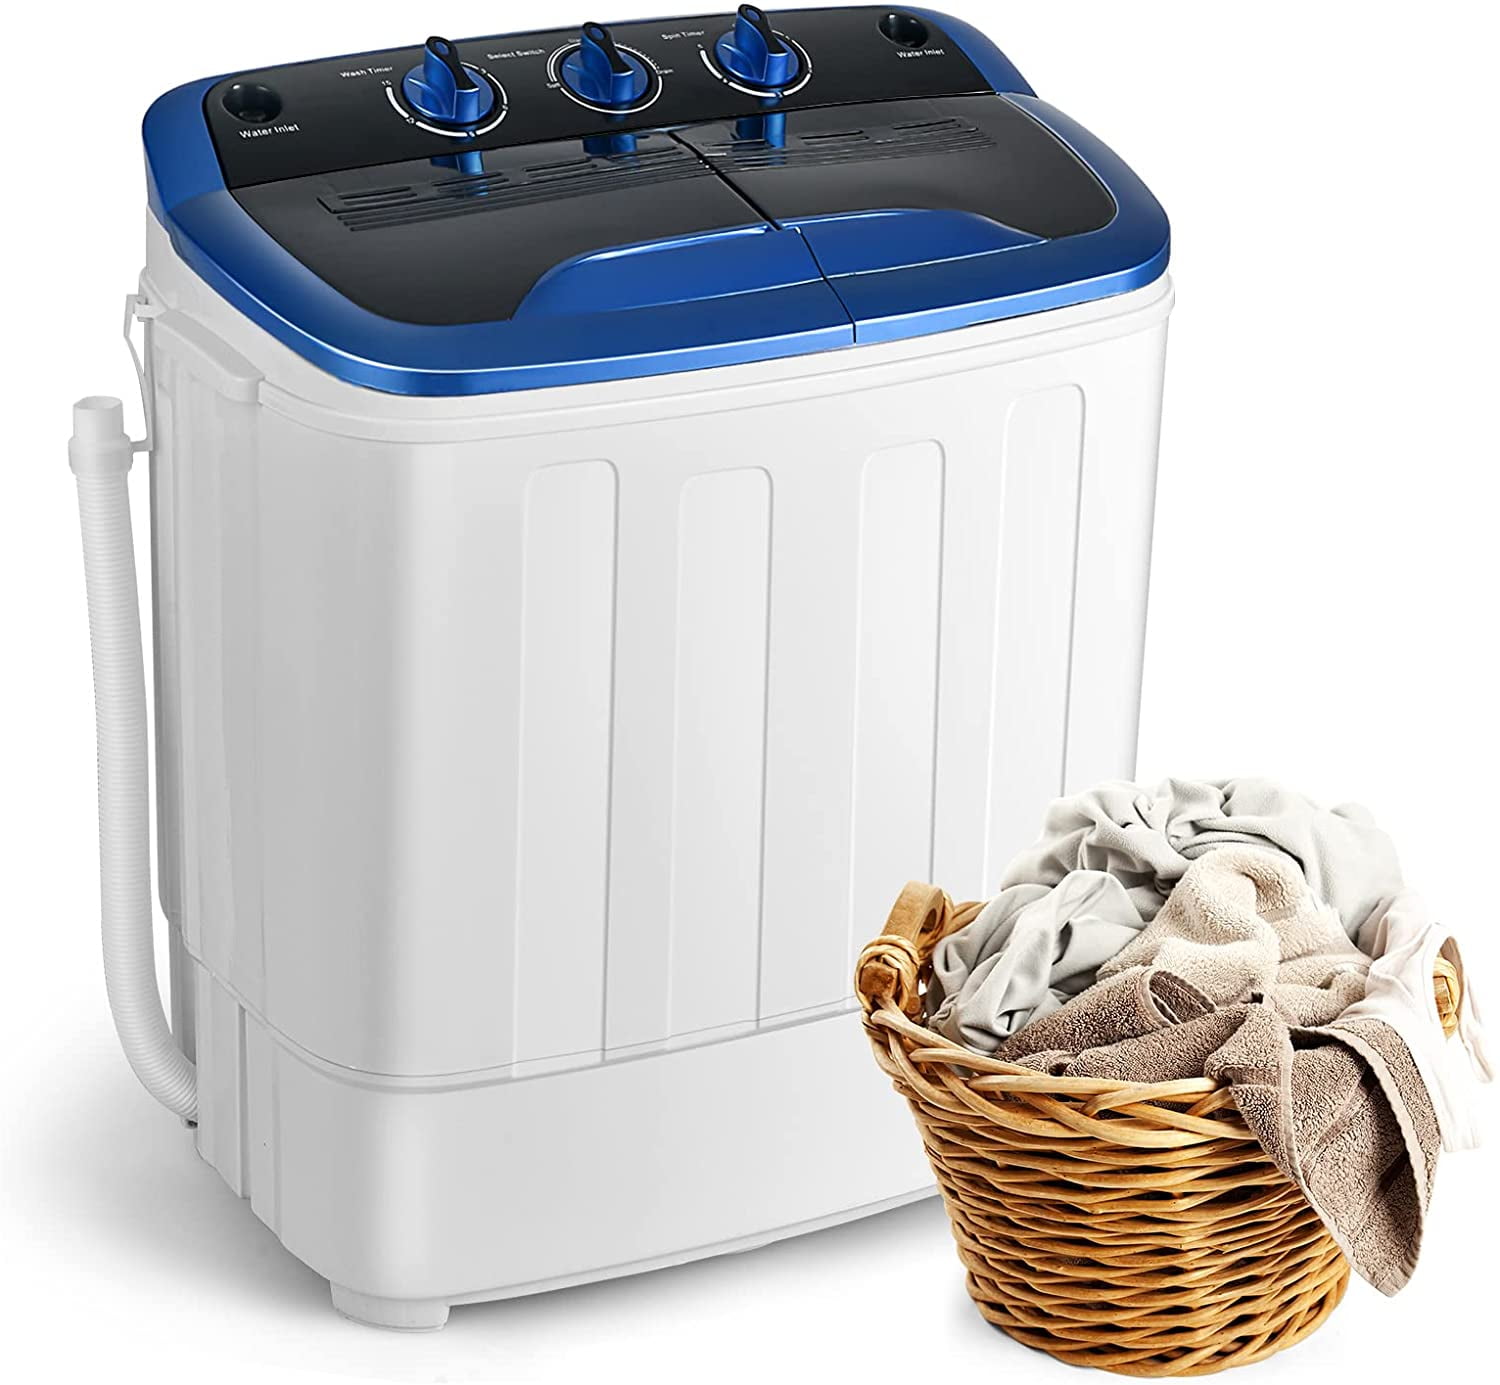 Mini washer • Compare (26 products) find best prices »